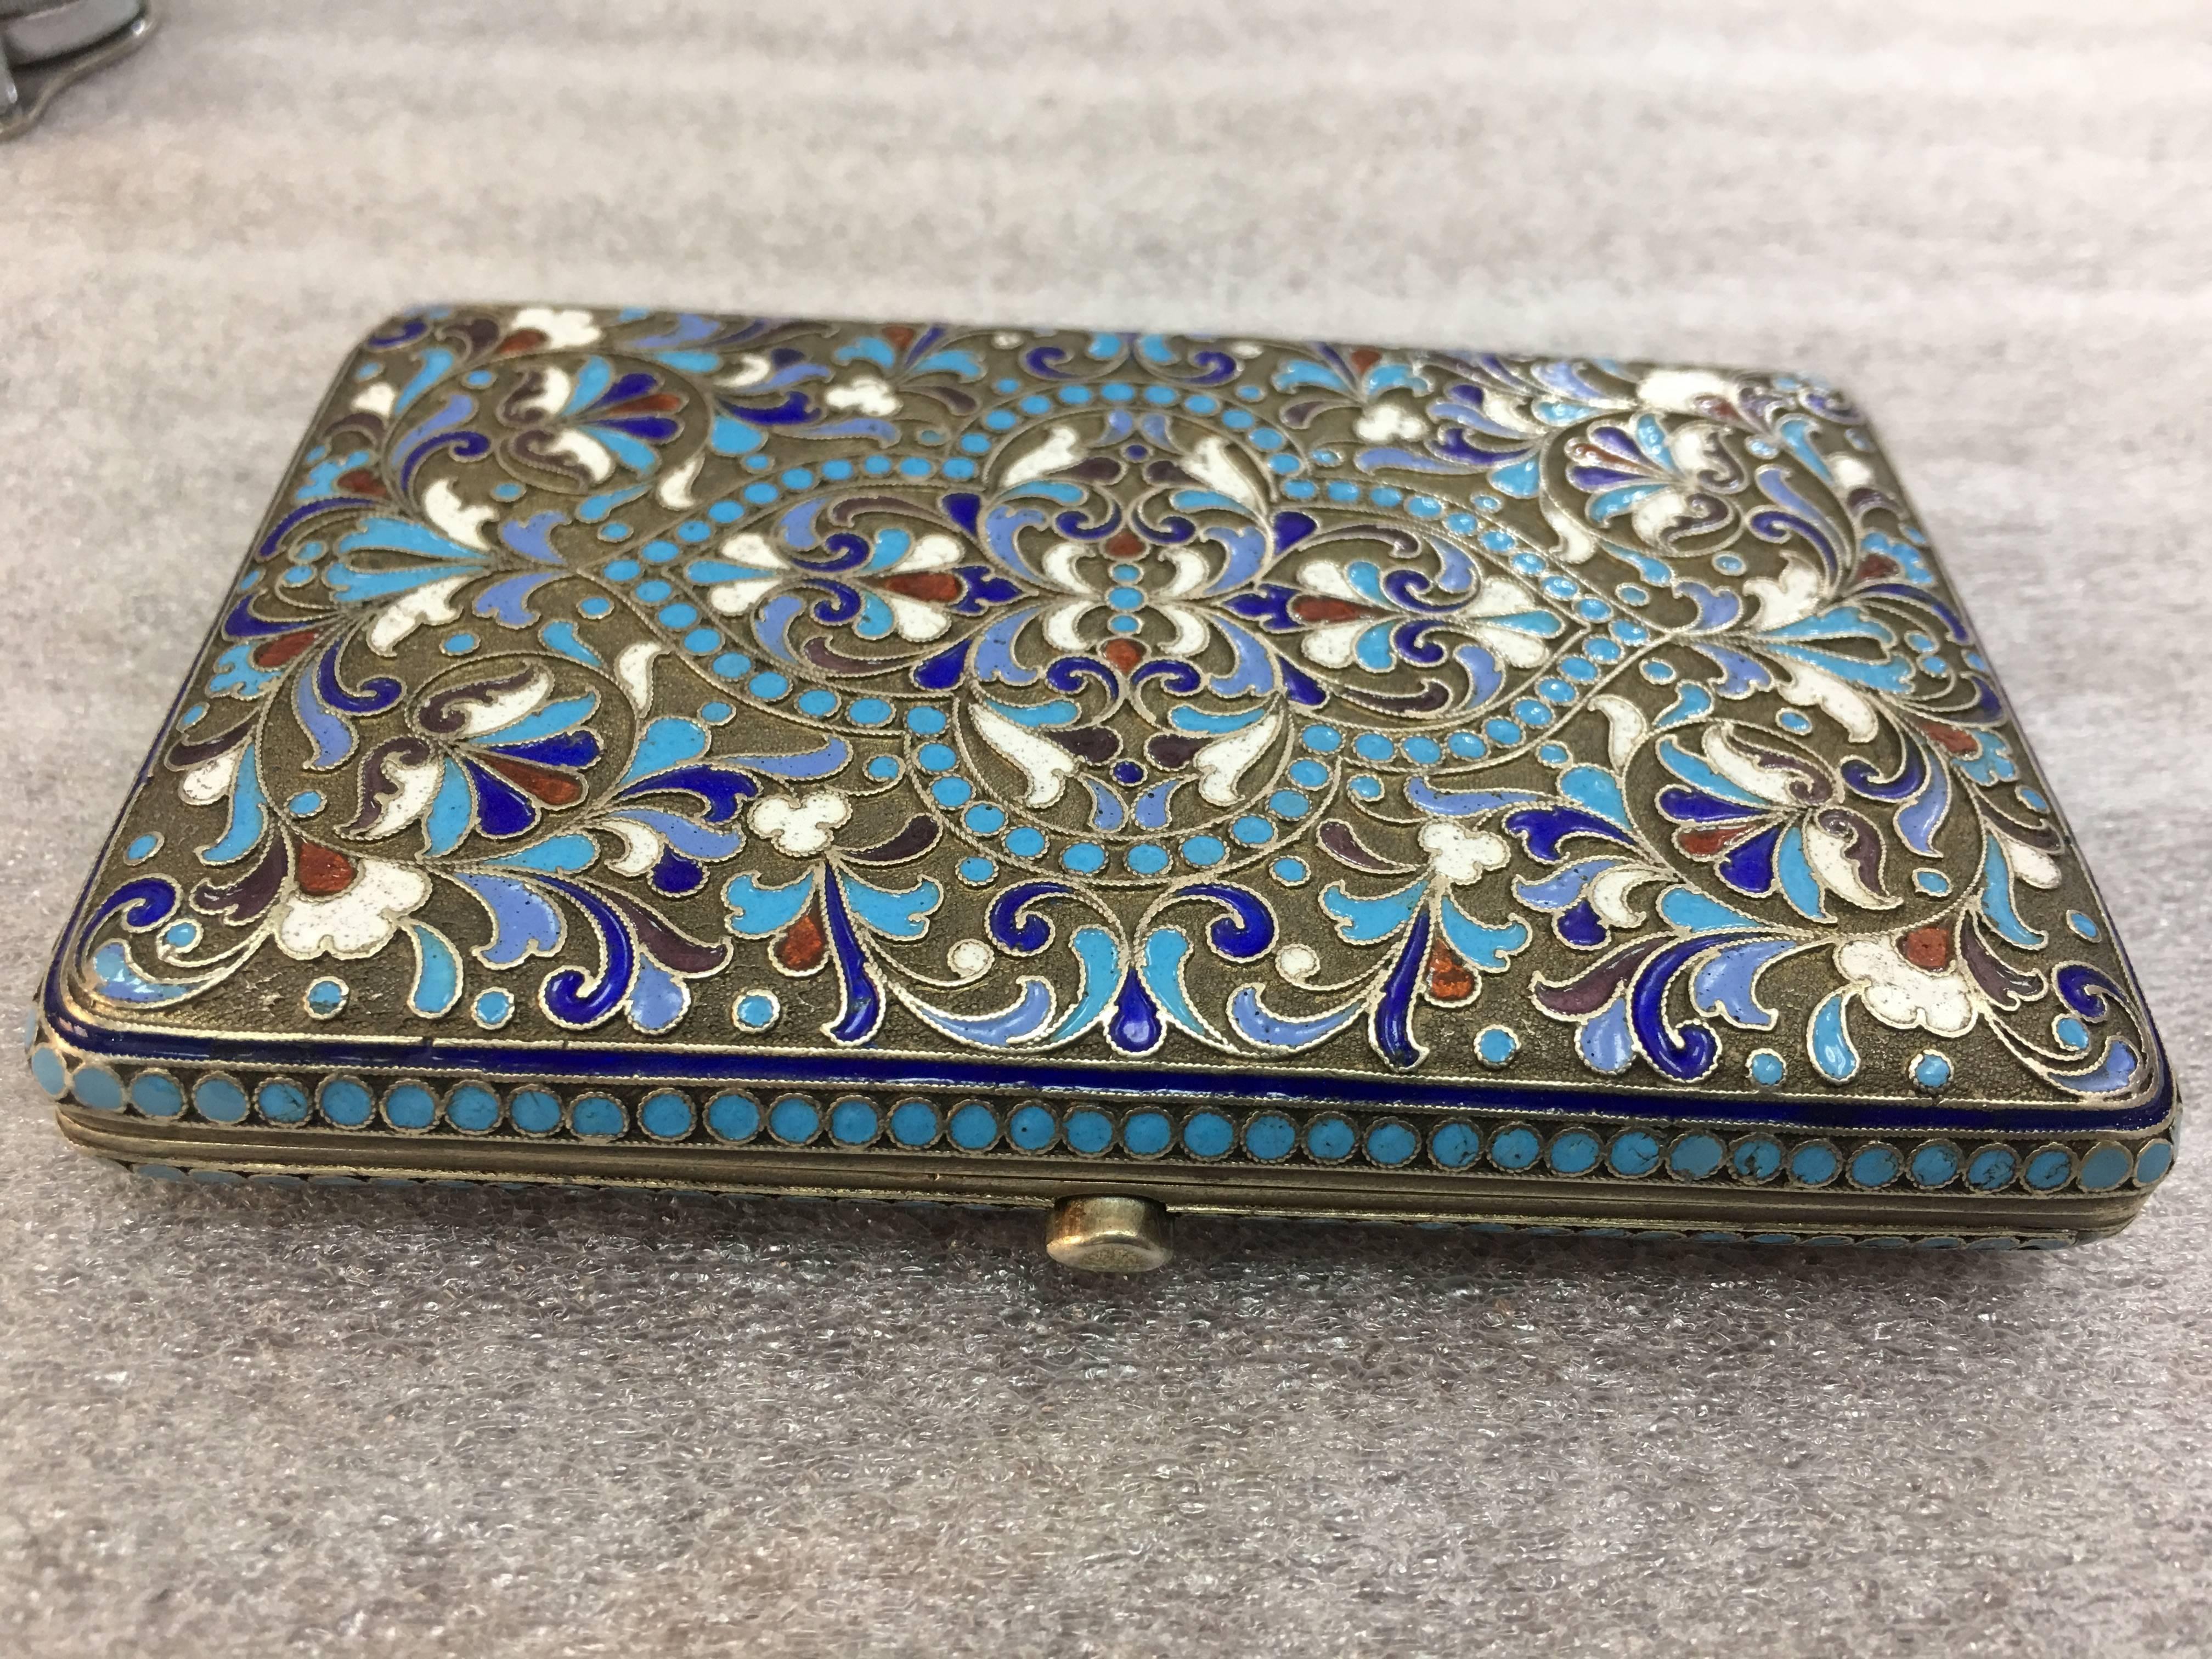 A very fine antique Russian silver and shaded cloisonné enamel cigarette case, made in Moscow between 1908 and 1917,
Enameled in Medieval Russian style with floral designs against turquoise ground.
Measures: 8 x 10.2 cm
Weight 191.2 g.